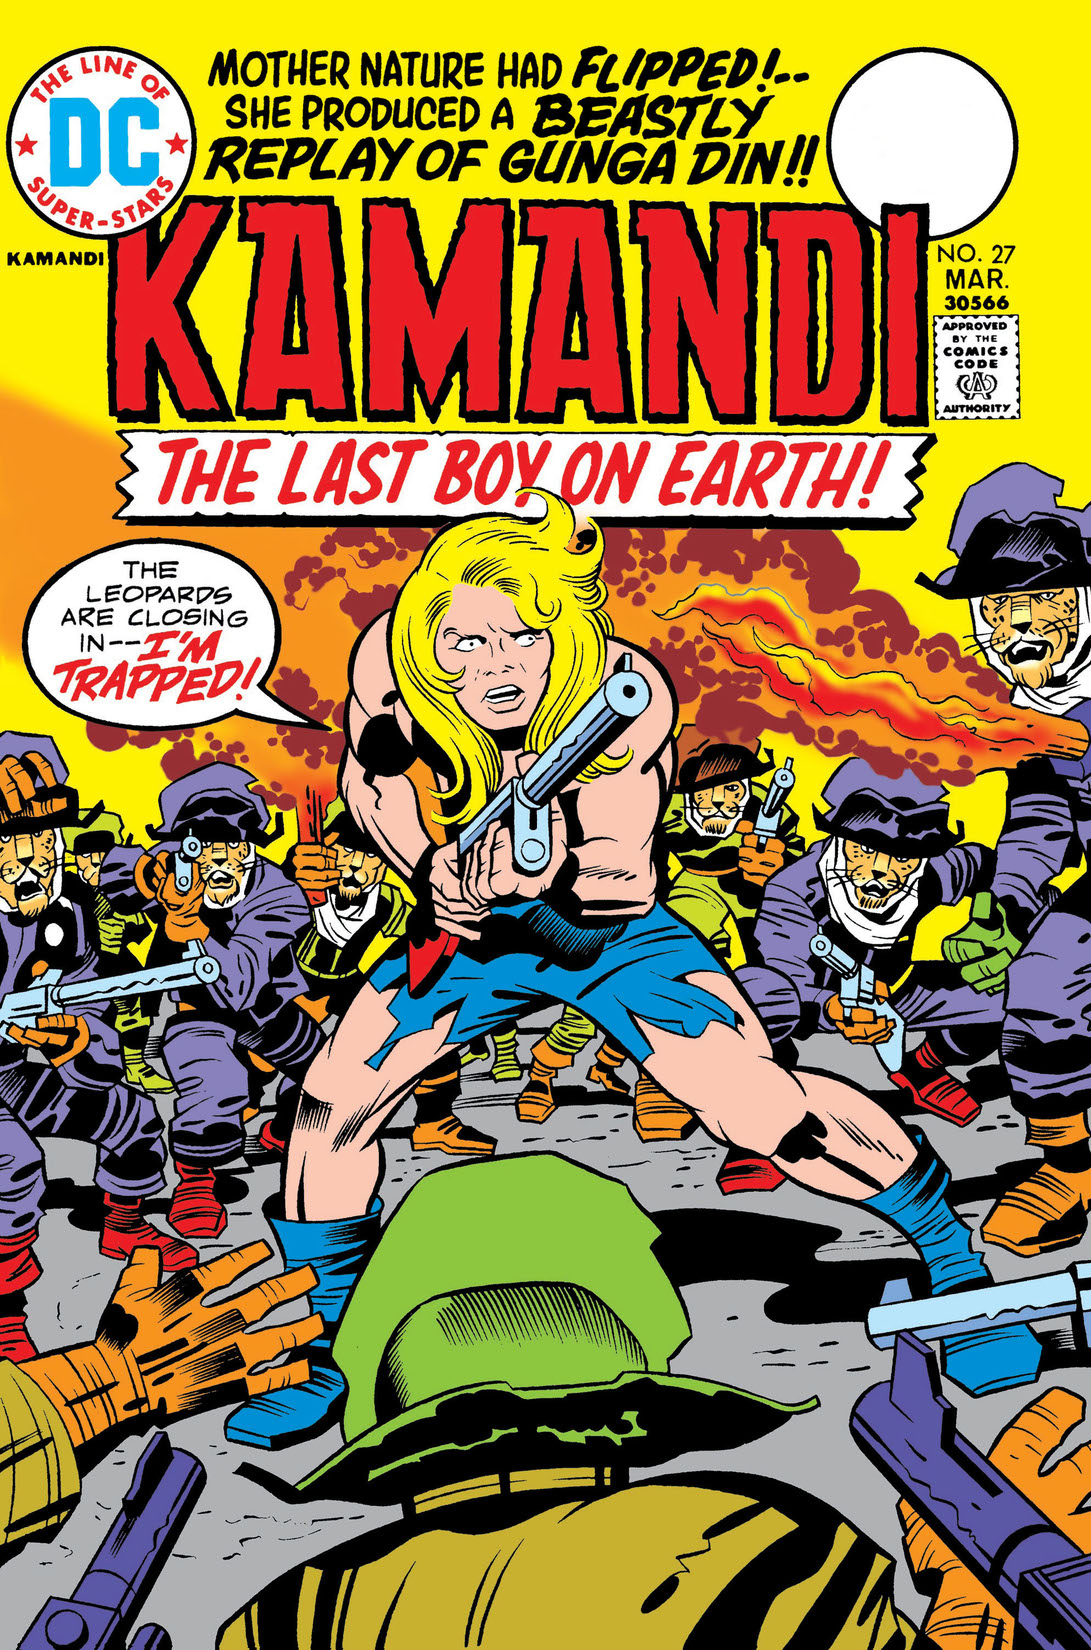 Kamandi: The Last Boy on Earth #27 preview images